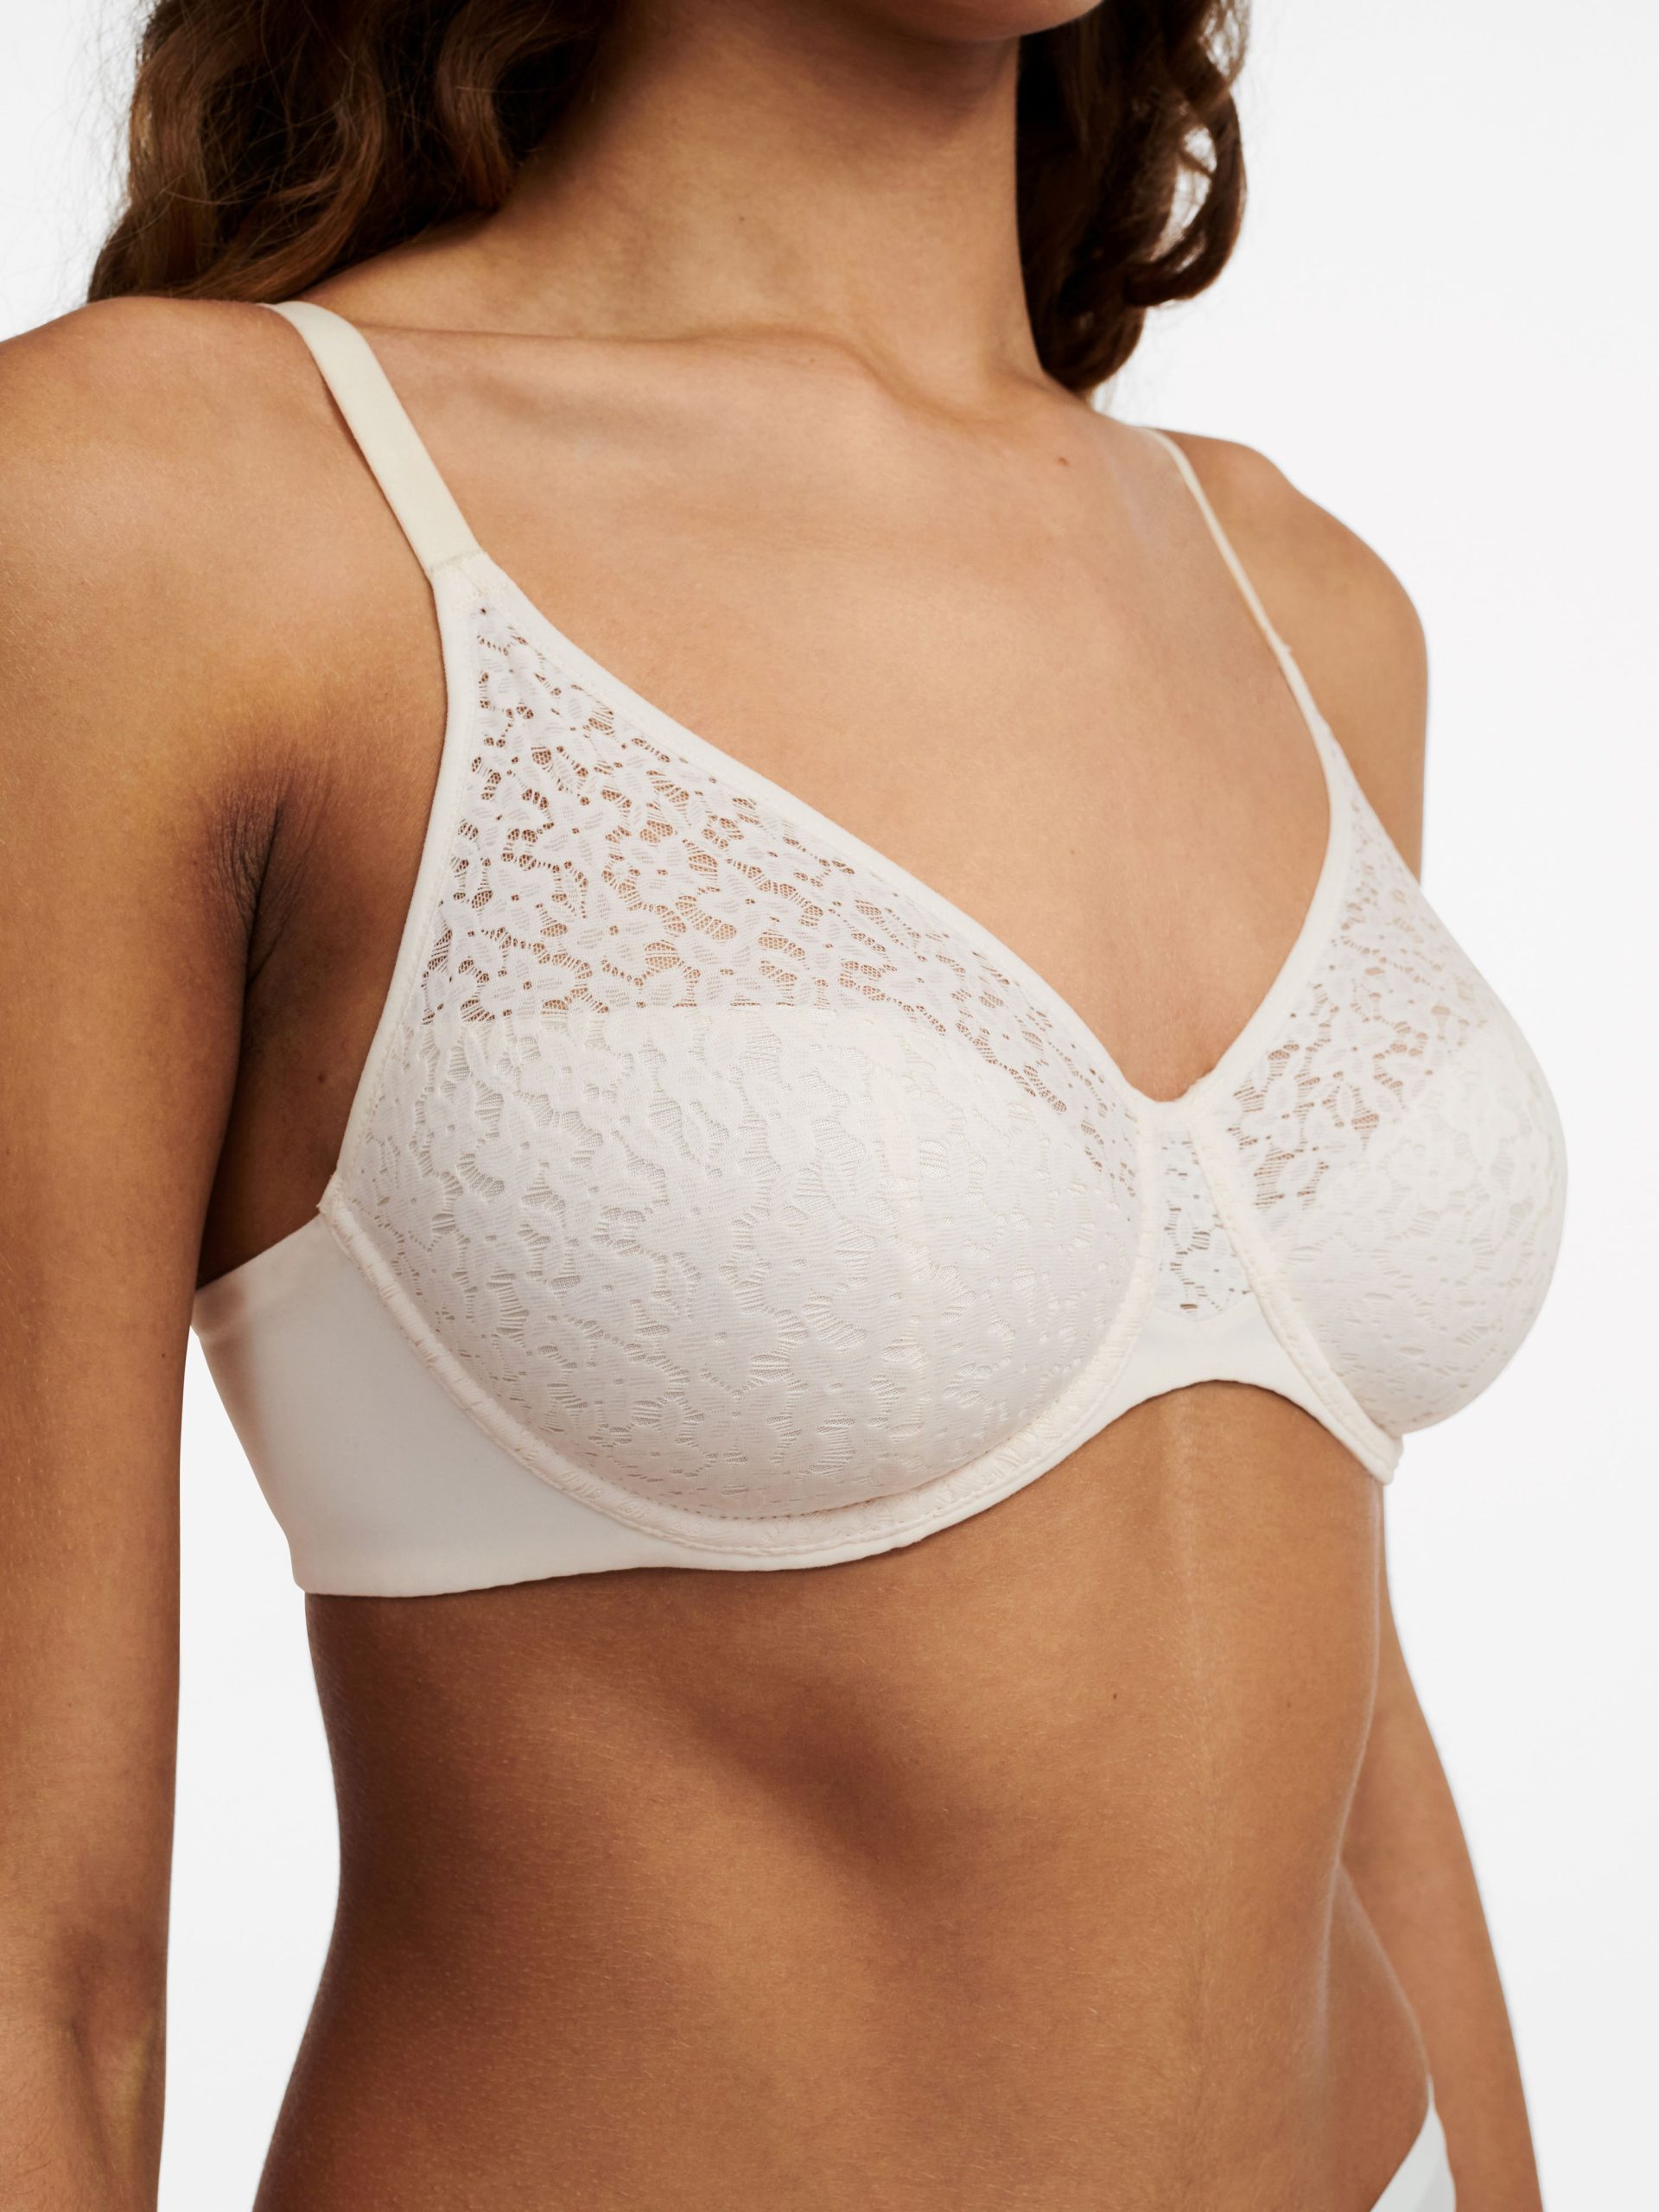 Chantelle Norah Comfort Front Closure Bra #13F6 - In the Mood